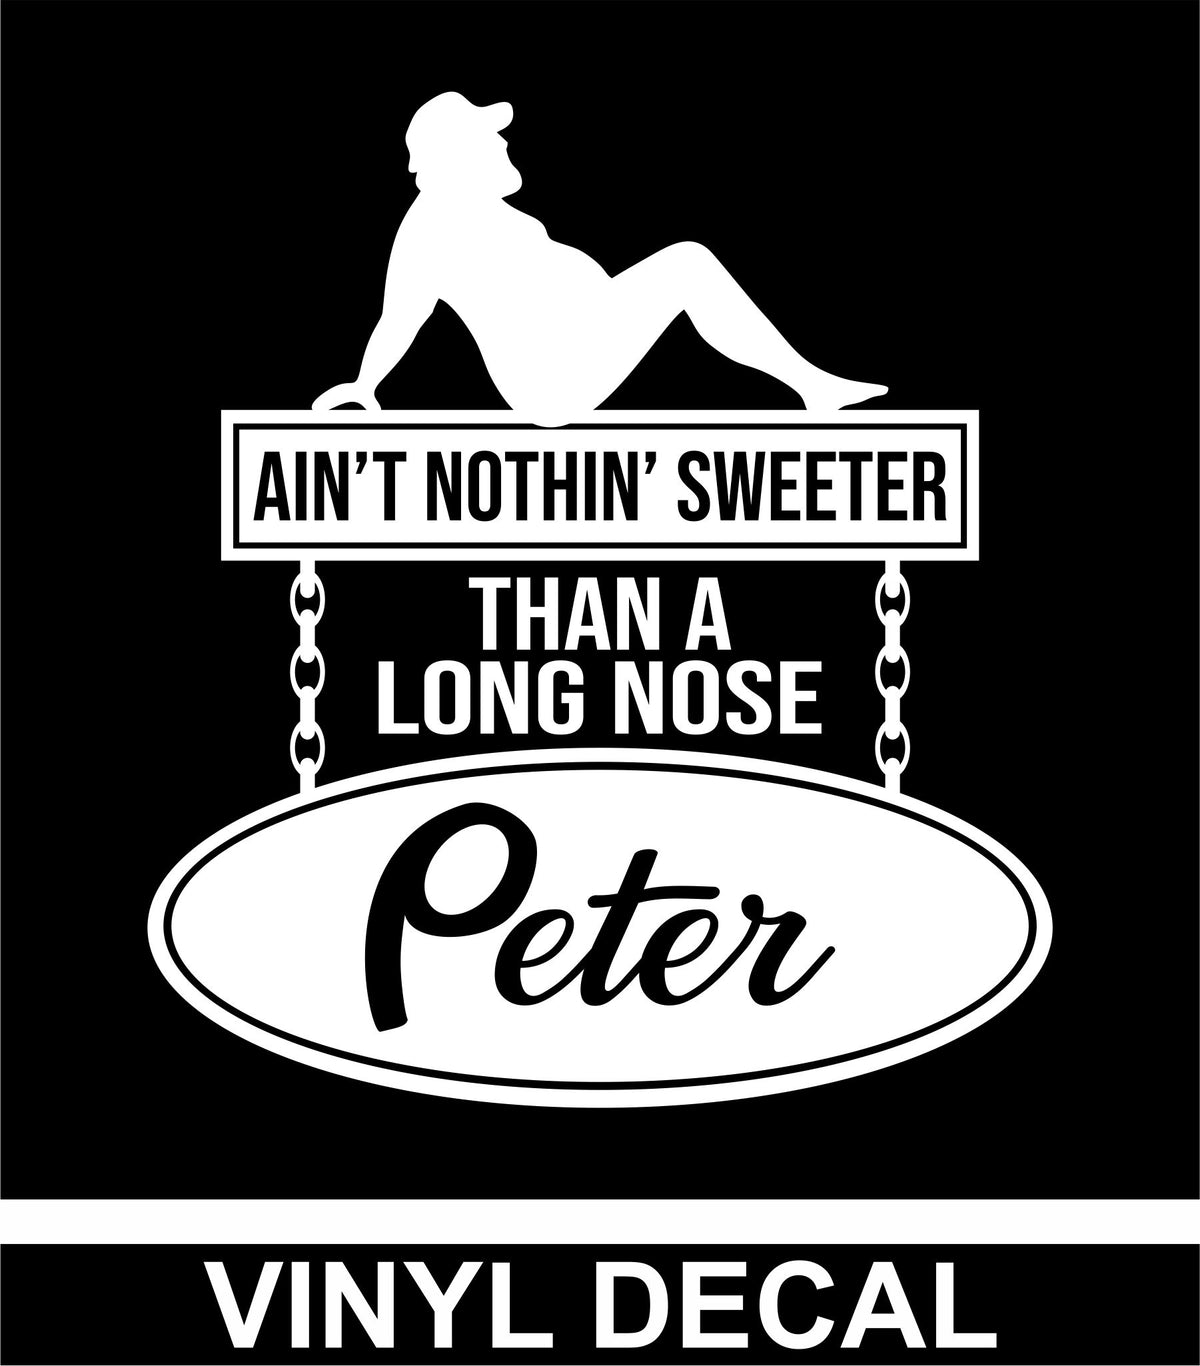 Ain't Nothin' Sweeter Than A Long Nose Peter - Trucker Guy - Vinyl Decal - Free Shipping